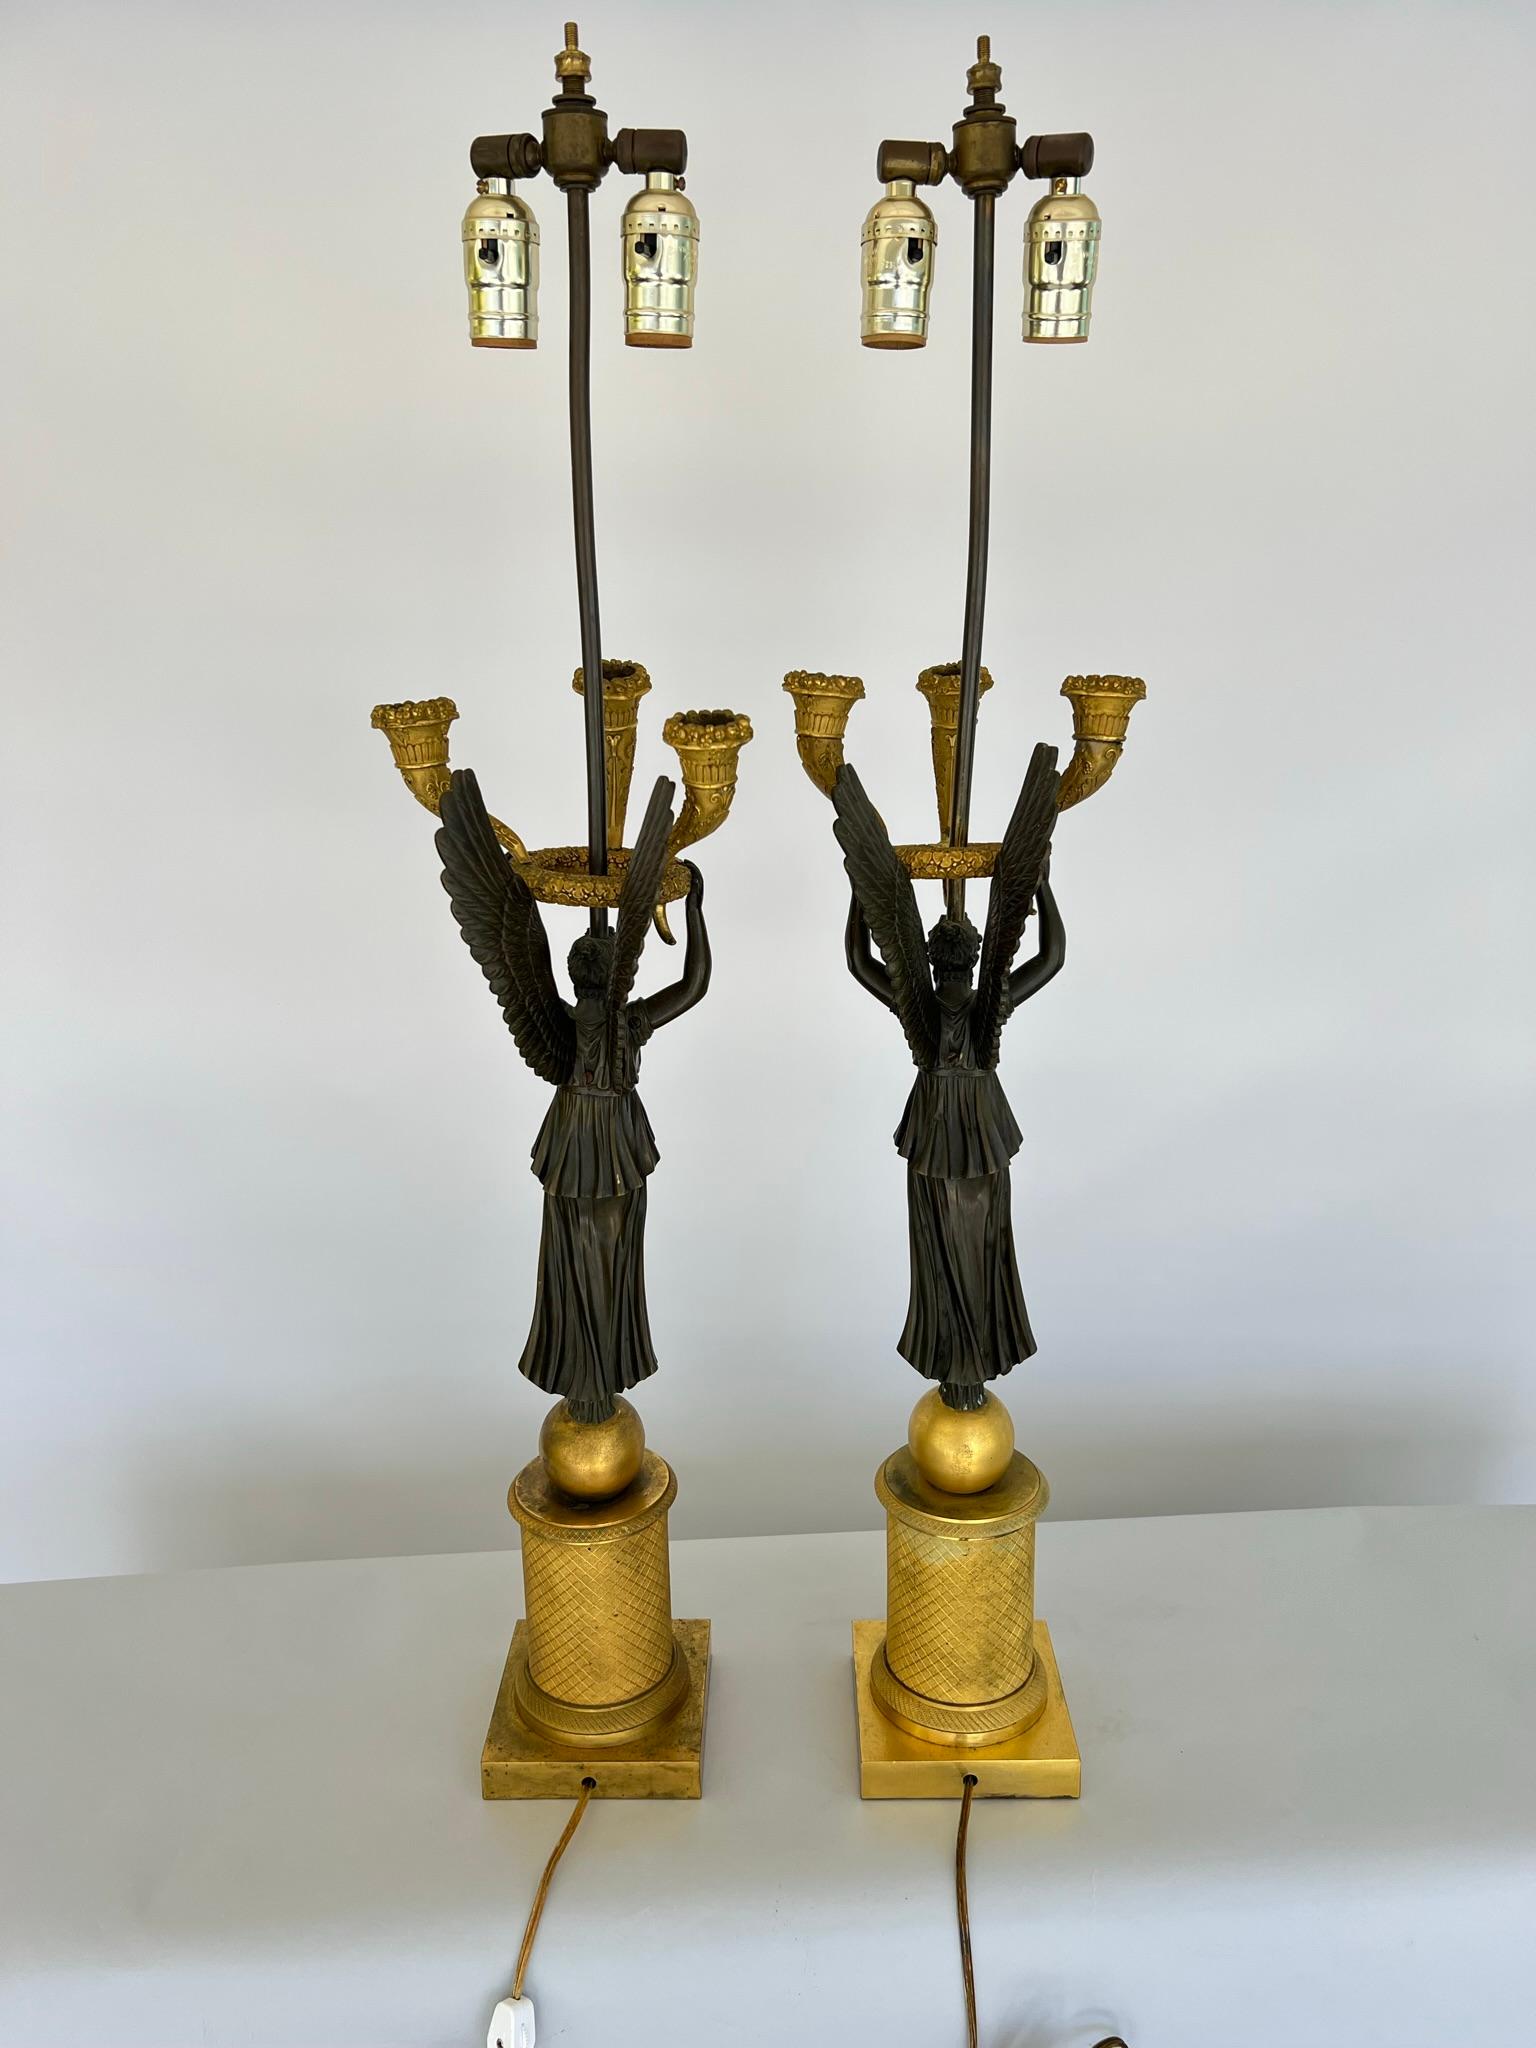 Patinated Pair of Late Empire Ormolu and Patented Bronze Figural Candelabra Lamps, C. 1815 For Sale